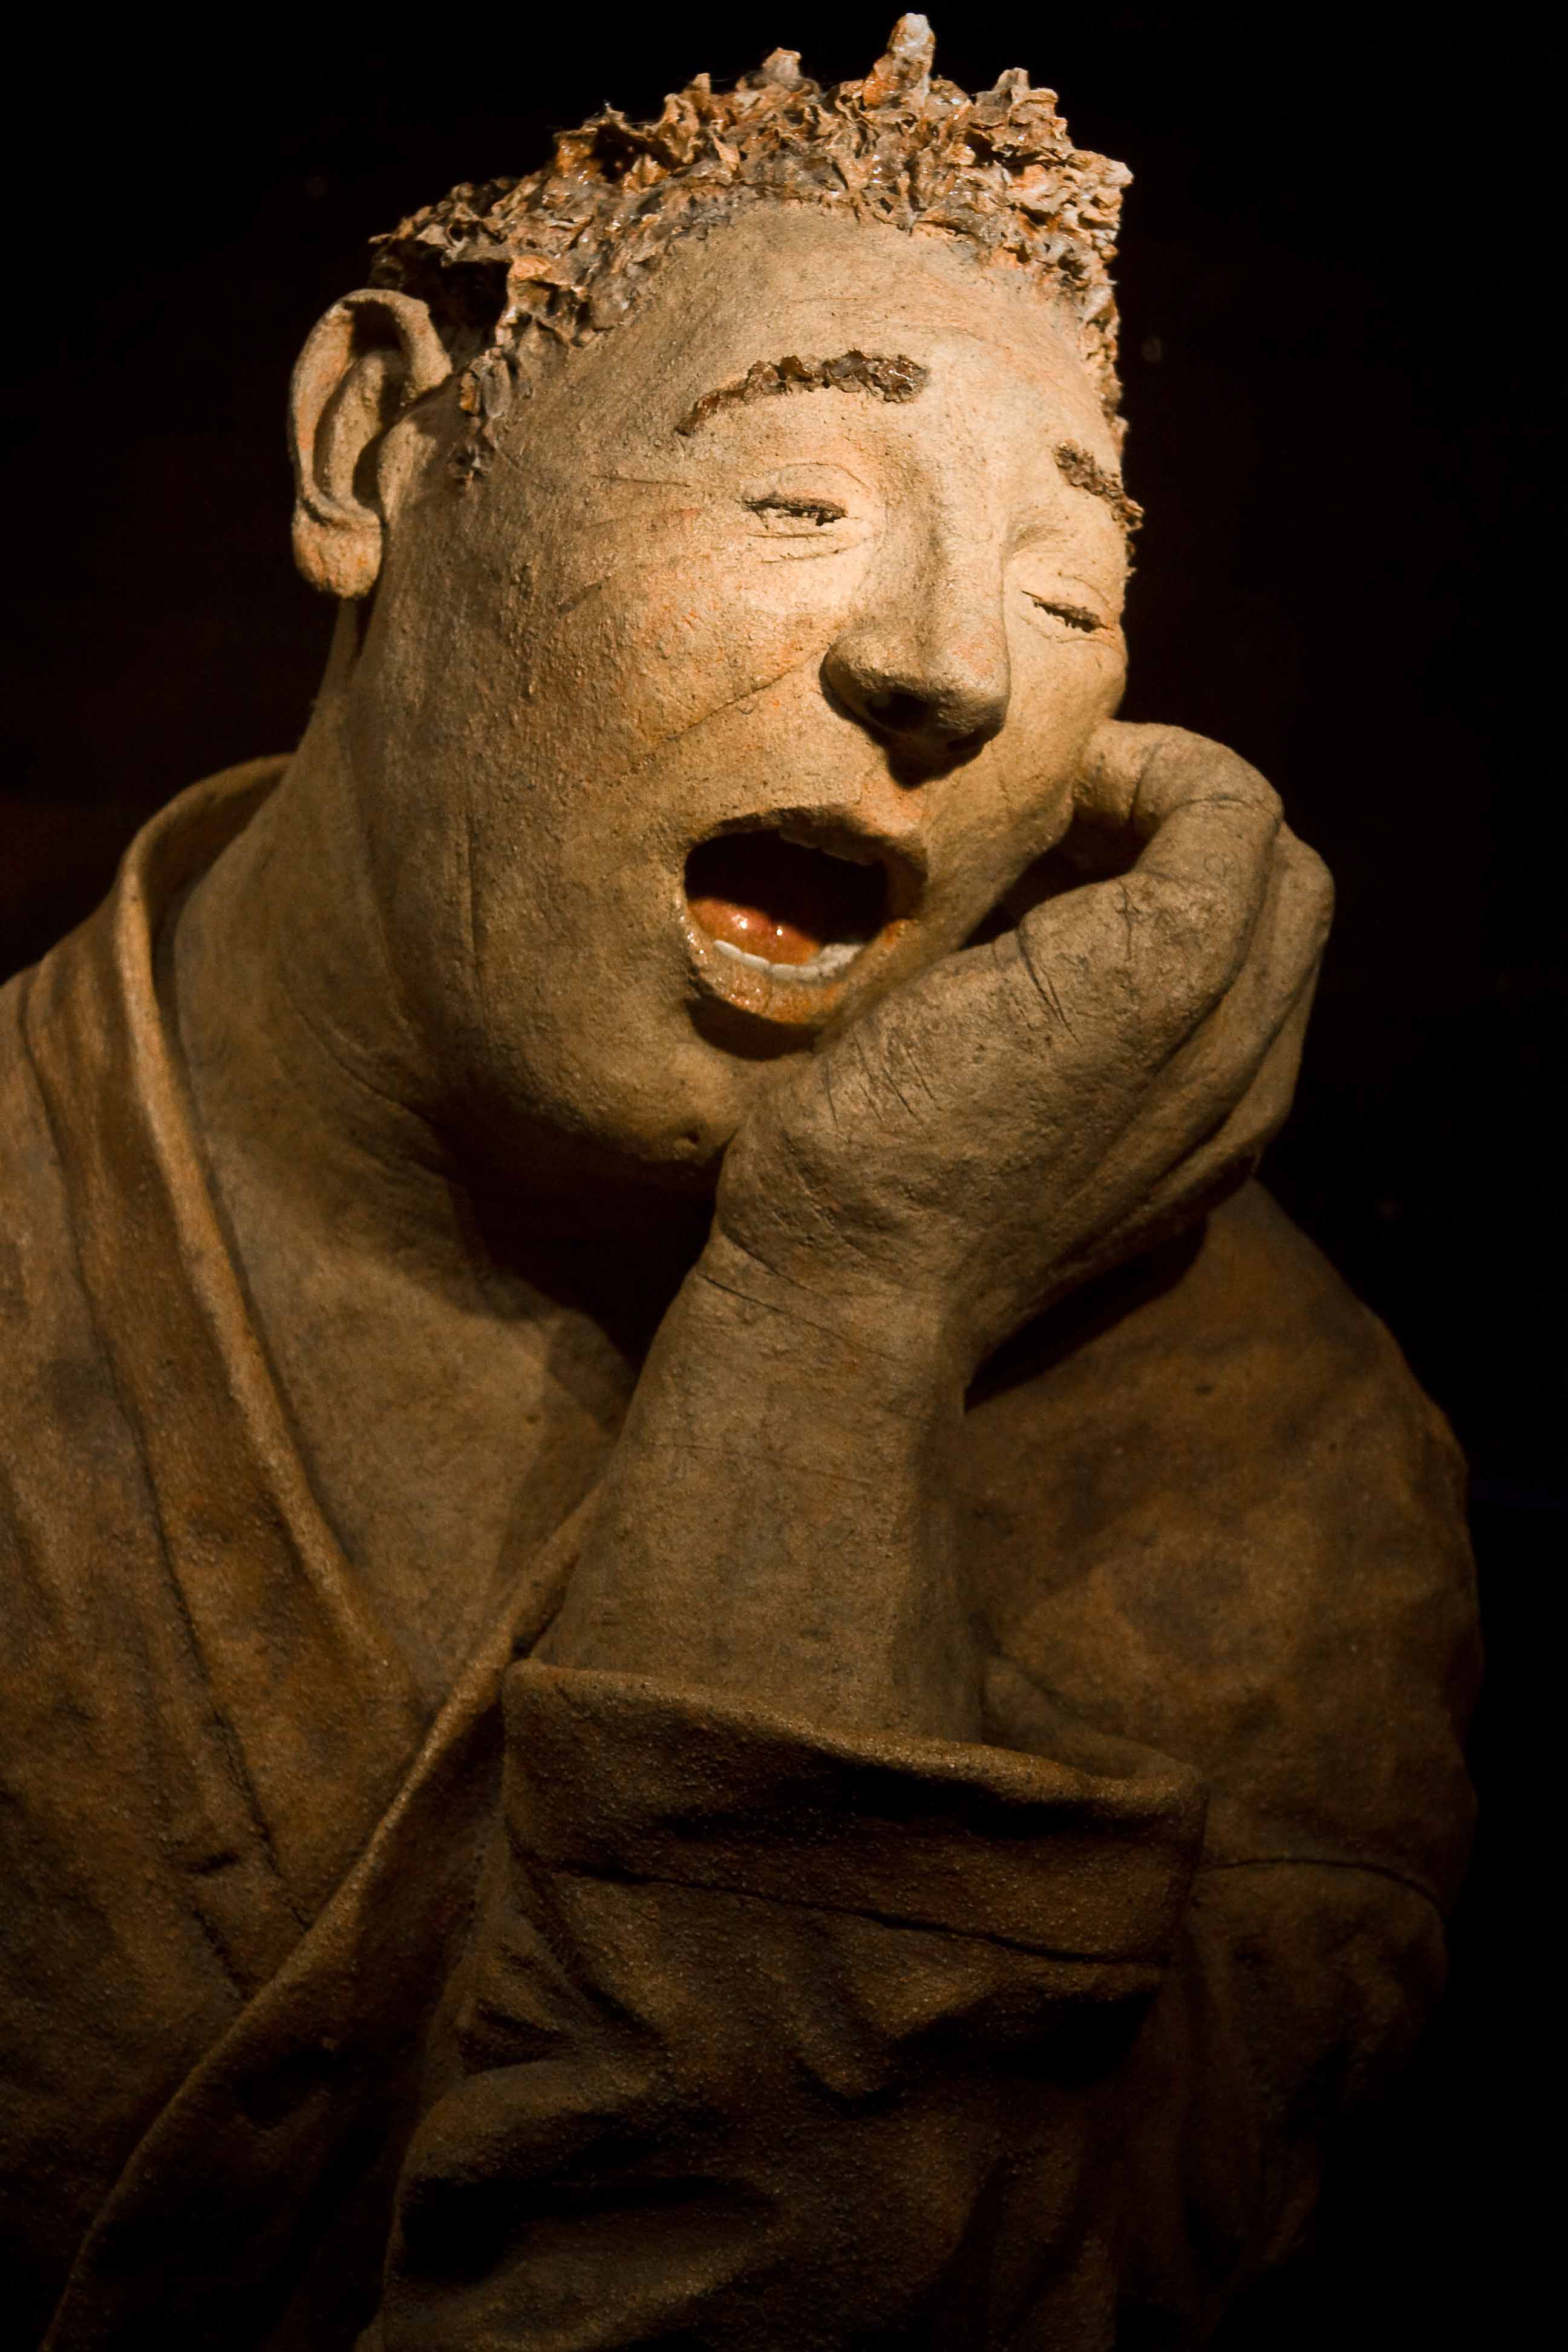 Image of a sculpture of a man with a tooth decay.